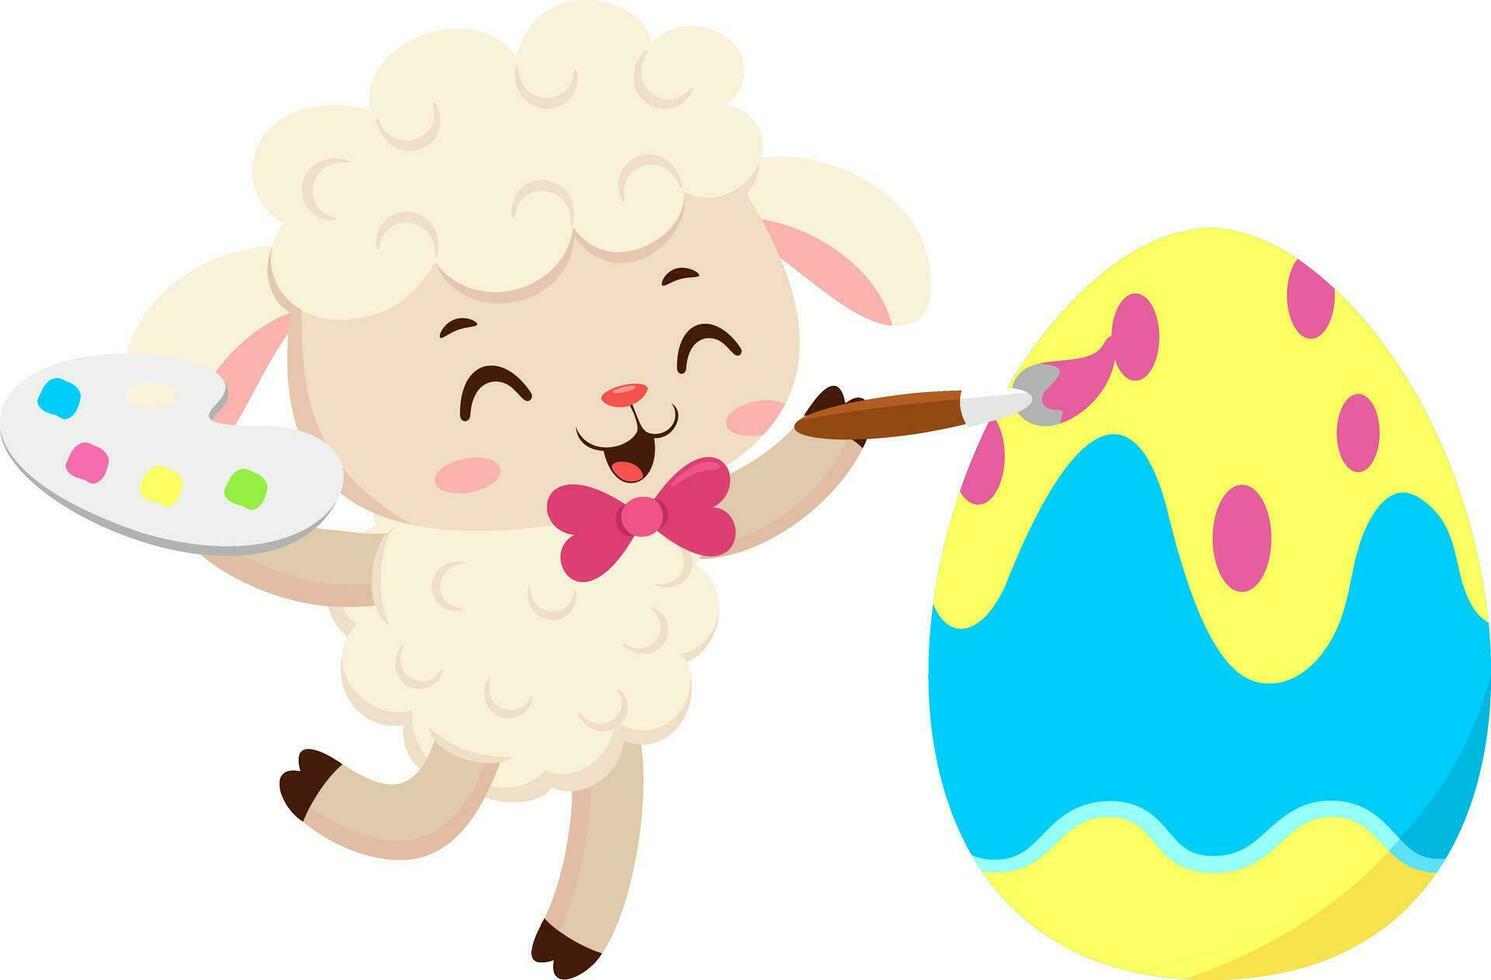 Cute Little Sheep Cartoon Character Painting Colorful Easter Egg. Vector Illustration Flat Design